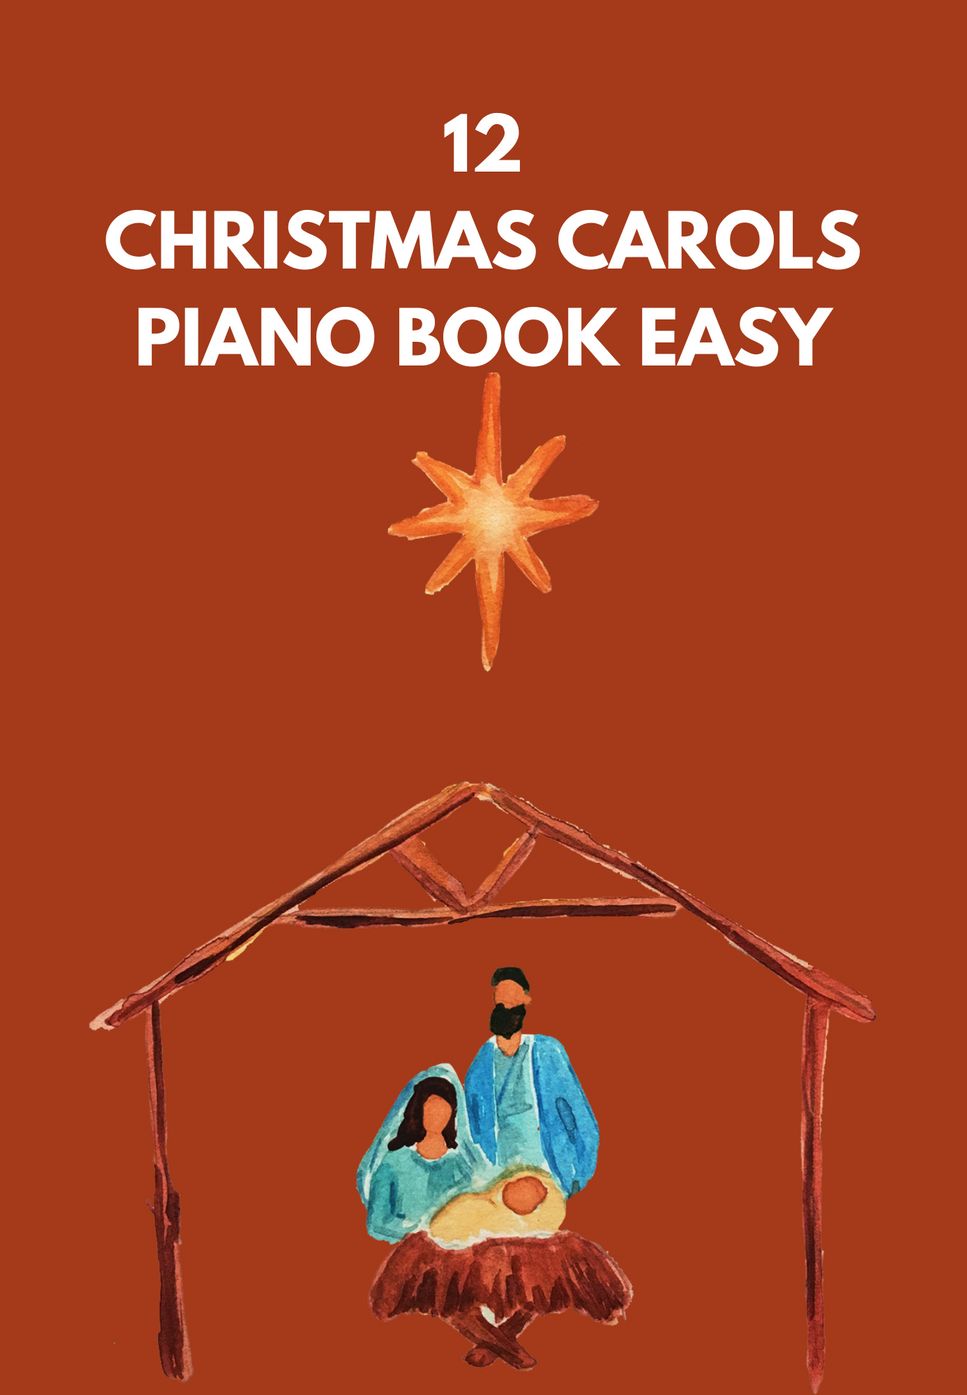 12 Christmas Carol Tunes for the Piano by SolKeys